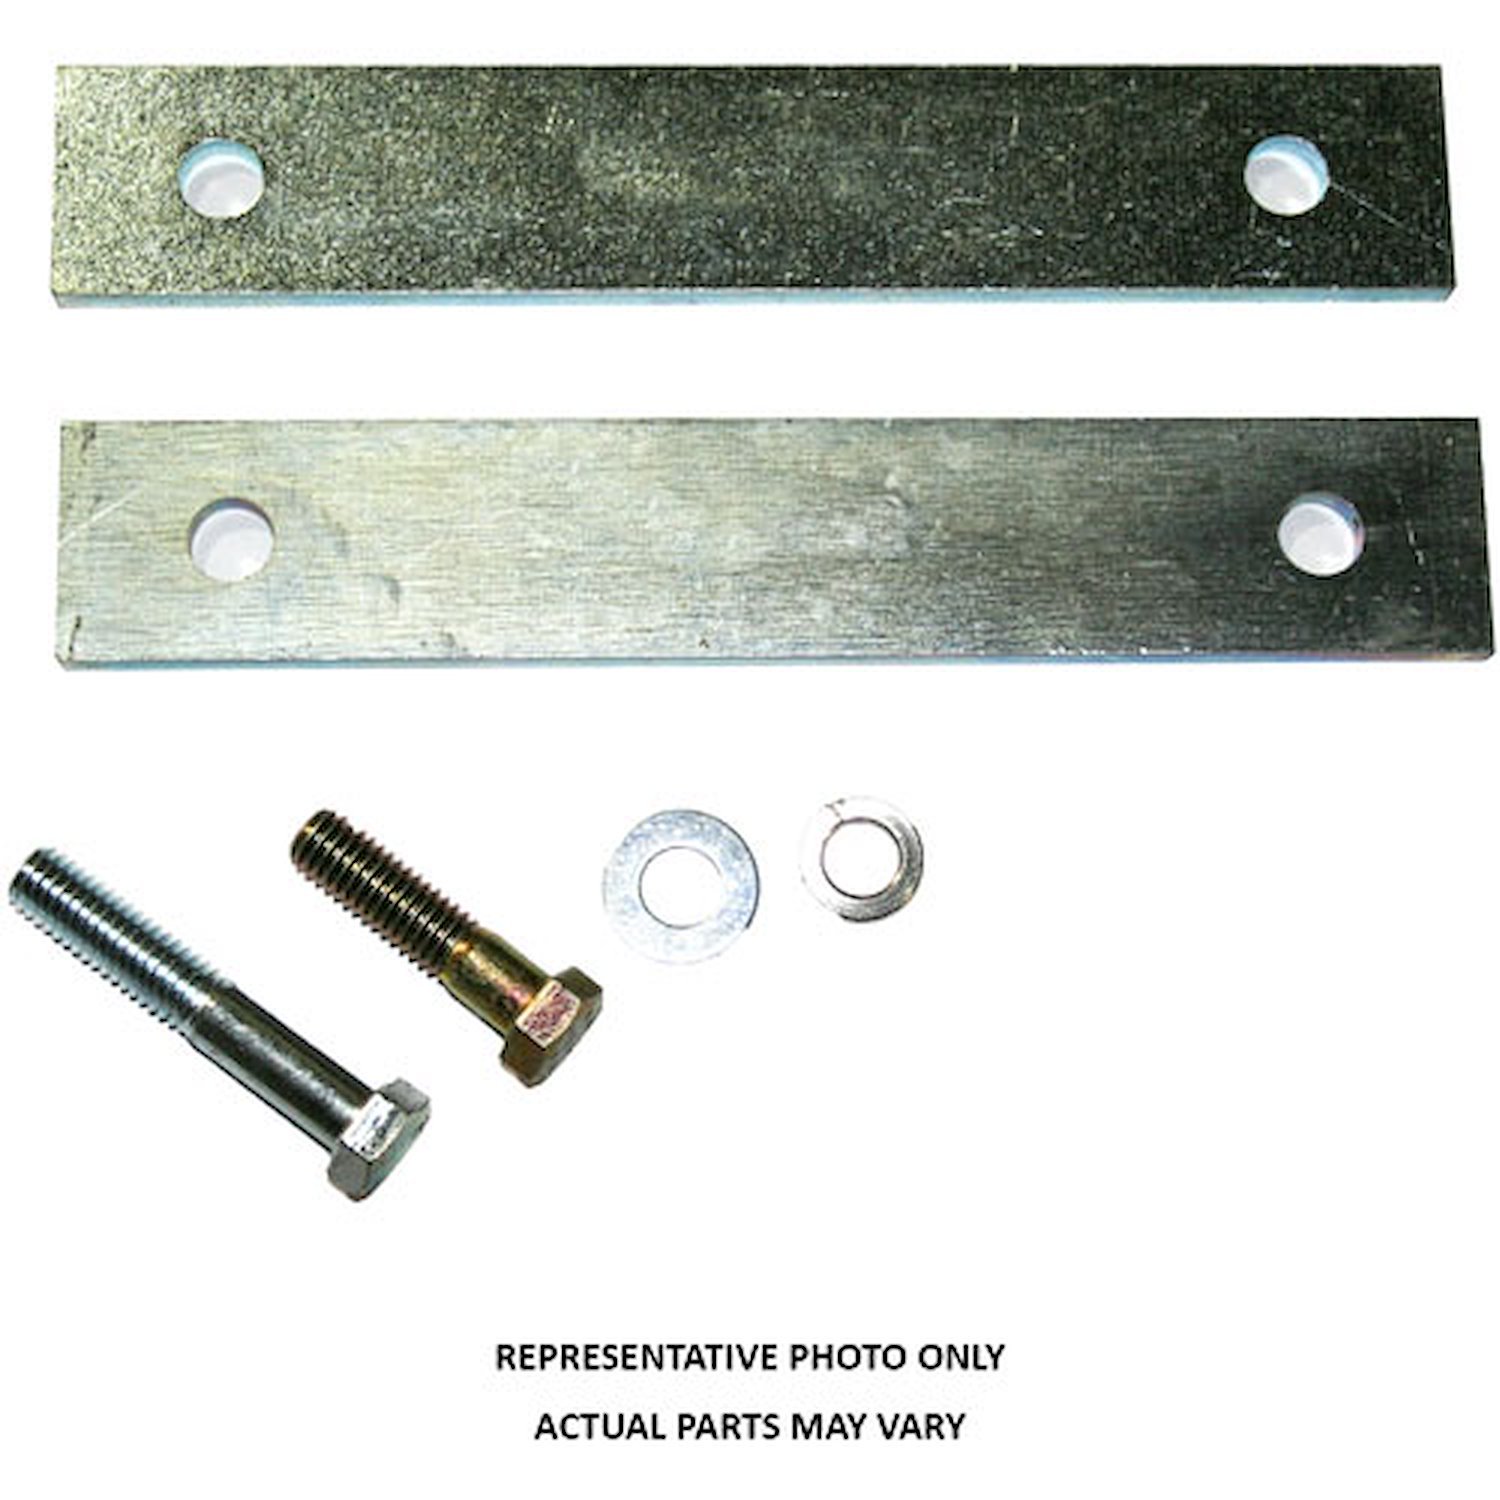 Carrier Bearing Drop Kit For Use w/Rear Blocks Or Springs